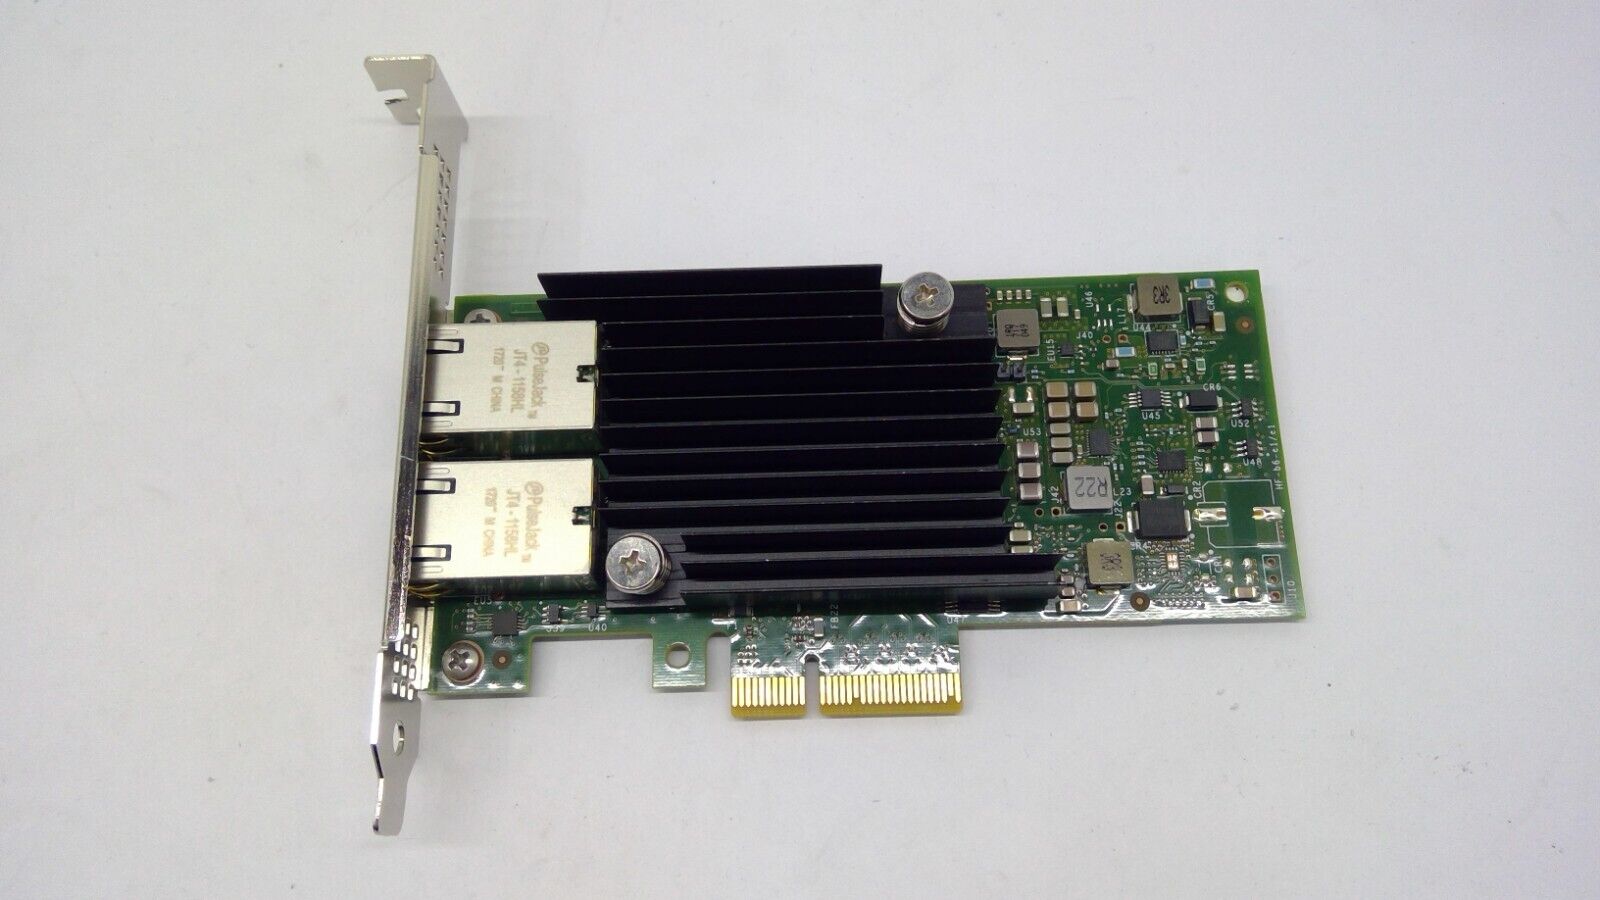 HPE 562T DUAL PORT 10GB PCI-E ETHERNET CARD ADAPTER 840137-001 817736-001